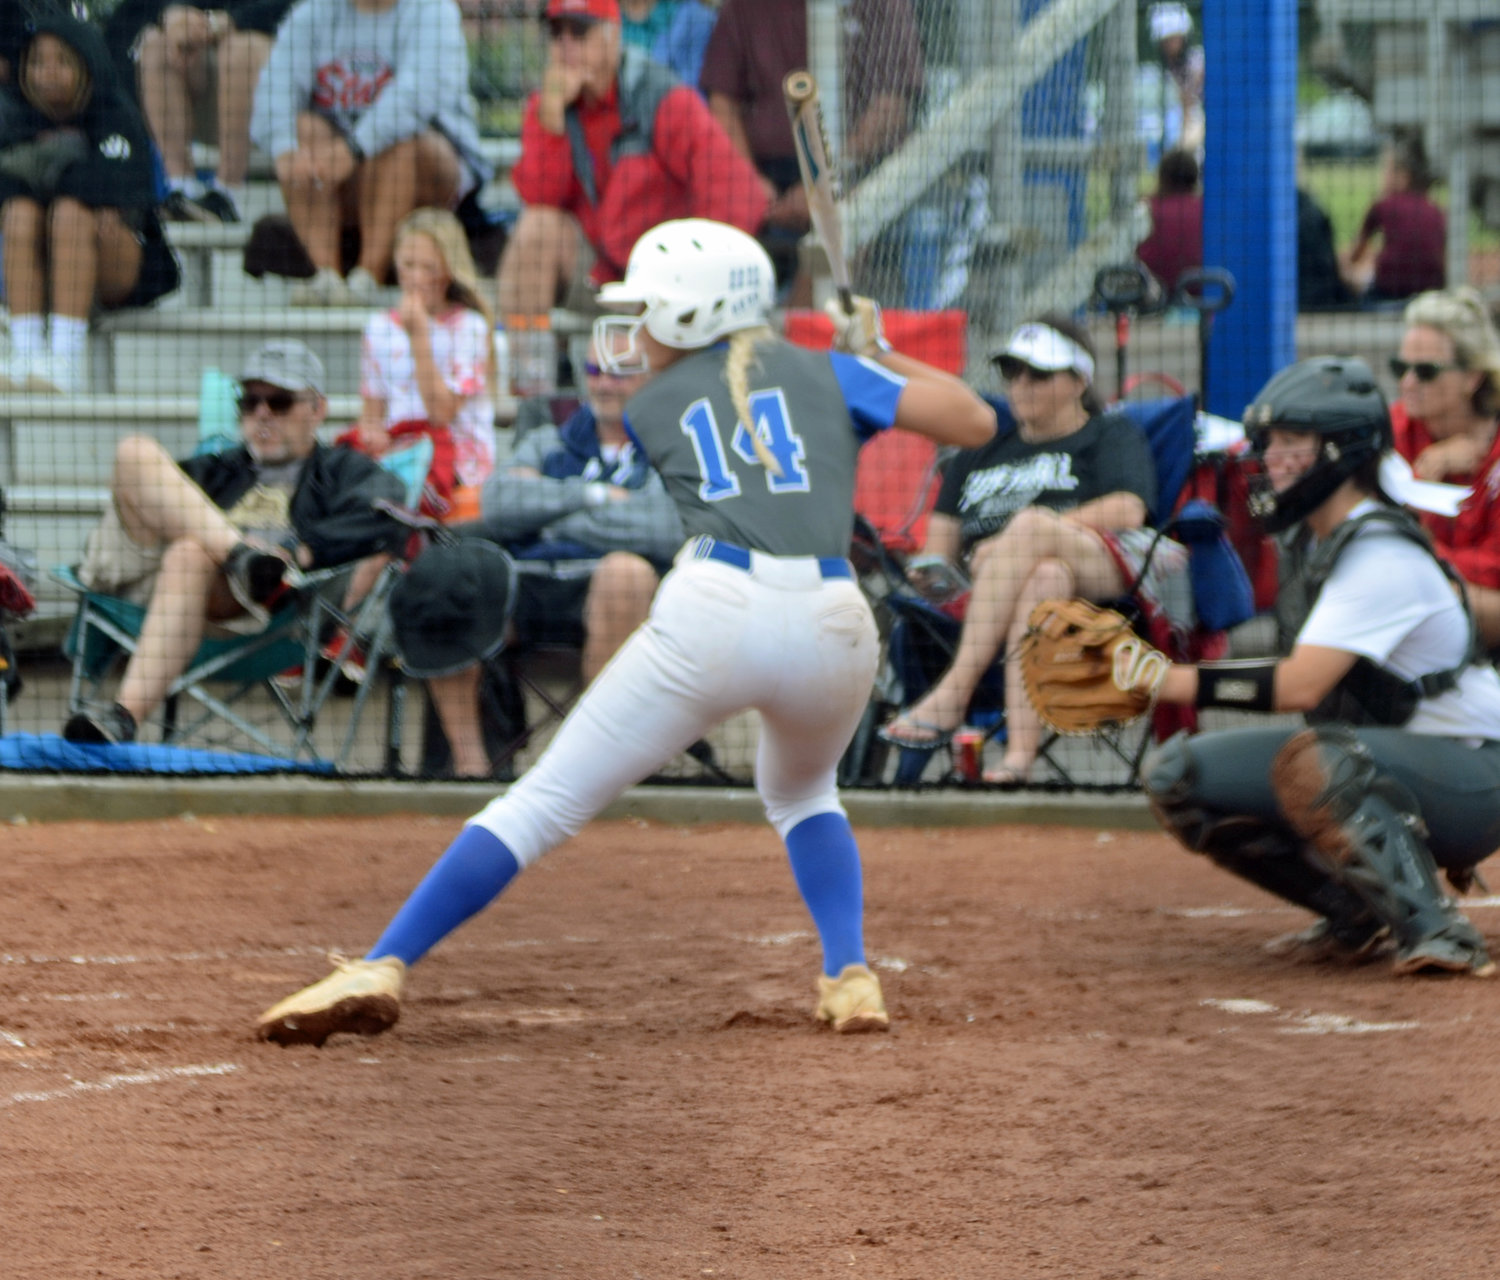 Briley Burnham, who has been on a roll at Murfreesboro, had one hit and scored a pair of runs while driving in the game’s first run in the fourth inning on a perfectly executed squeeze bunt.